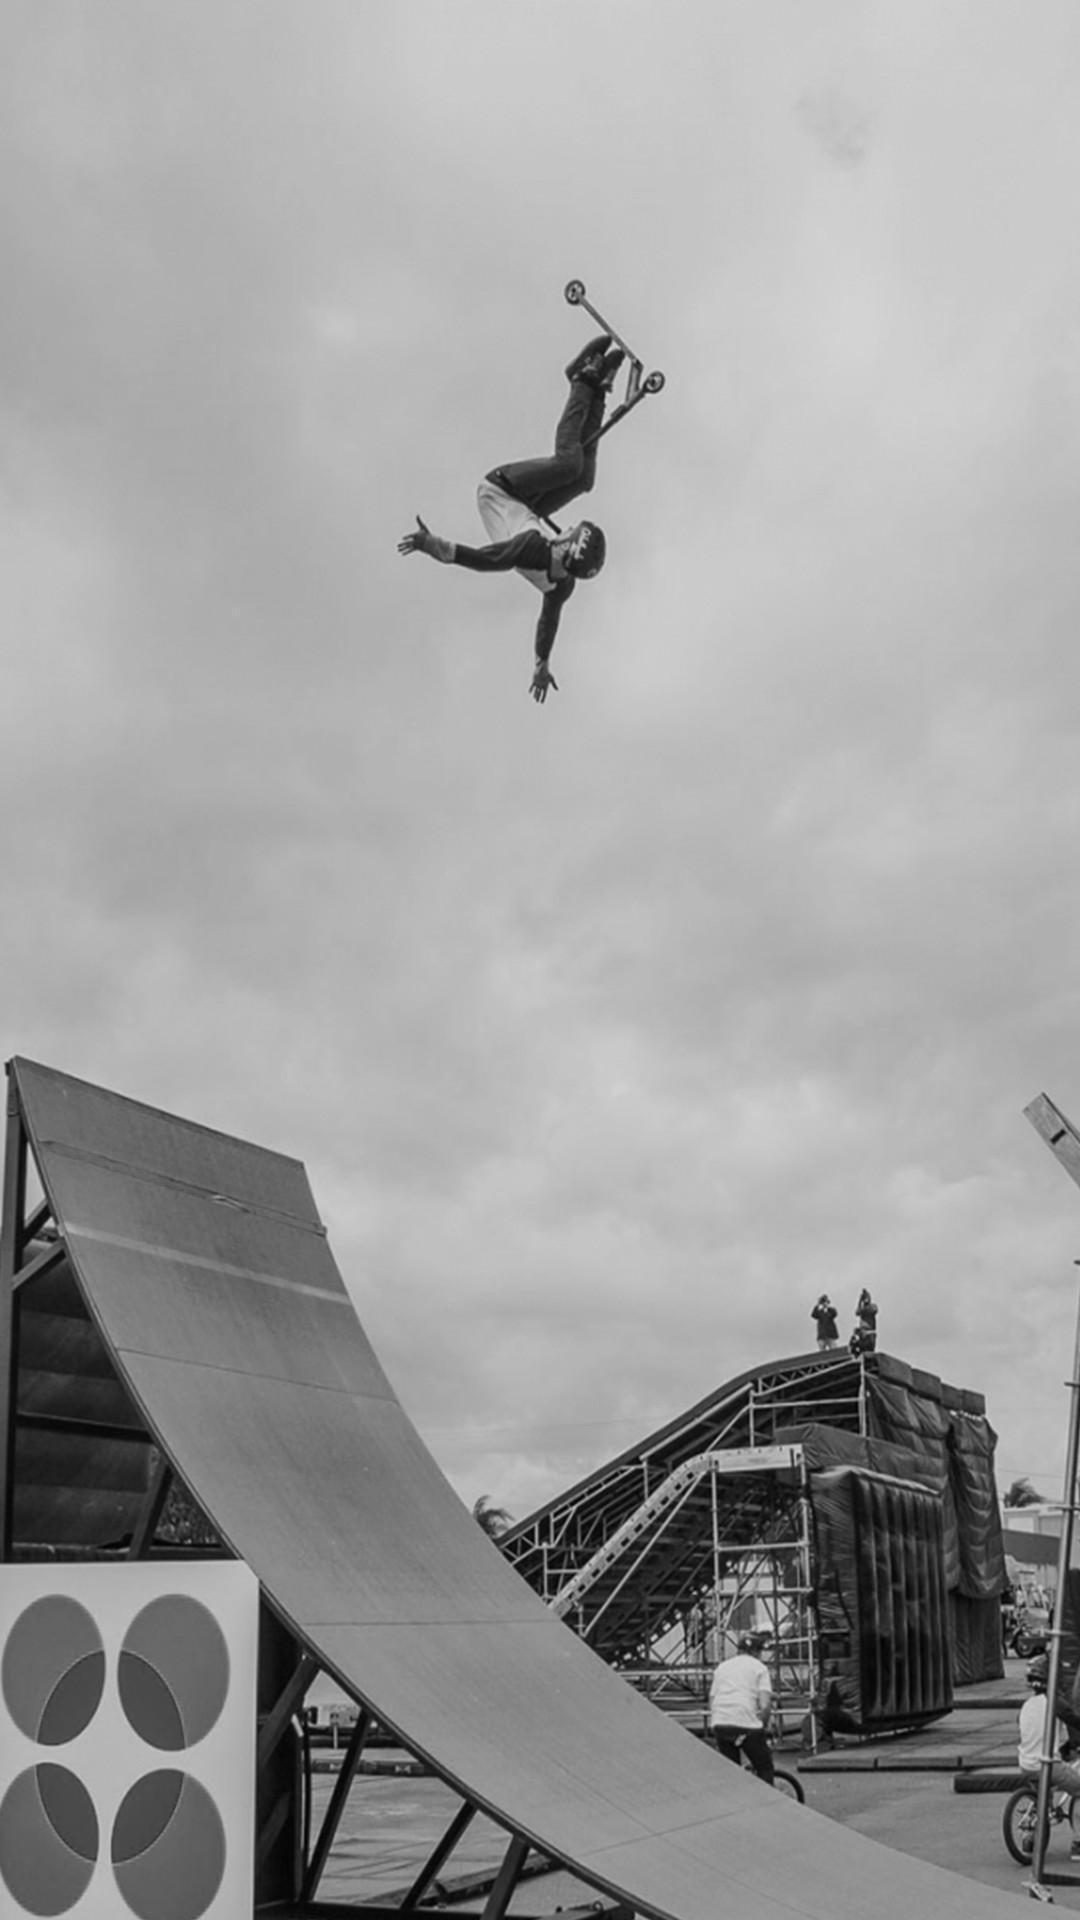 Scootering: Monochrome, Black and White, Freestyle scooter riding, Extreme acrobatics in the air, Extreme sports stunts. 1080x1920 Full HD Wallpaper.